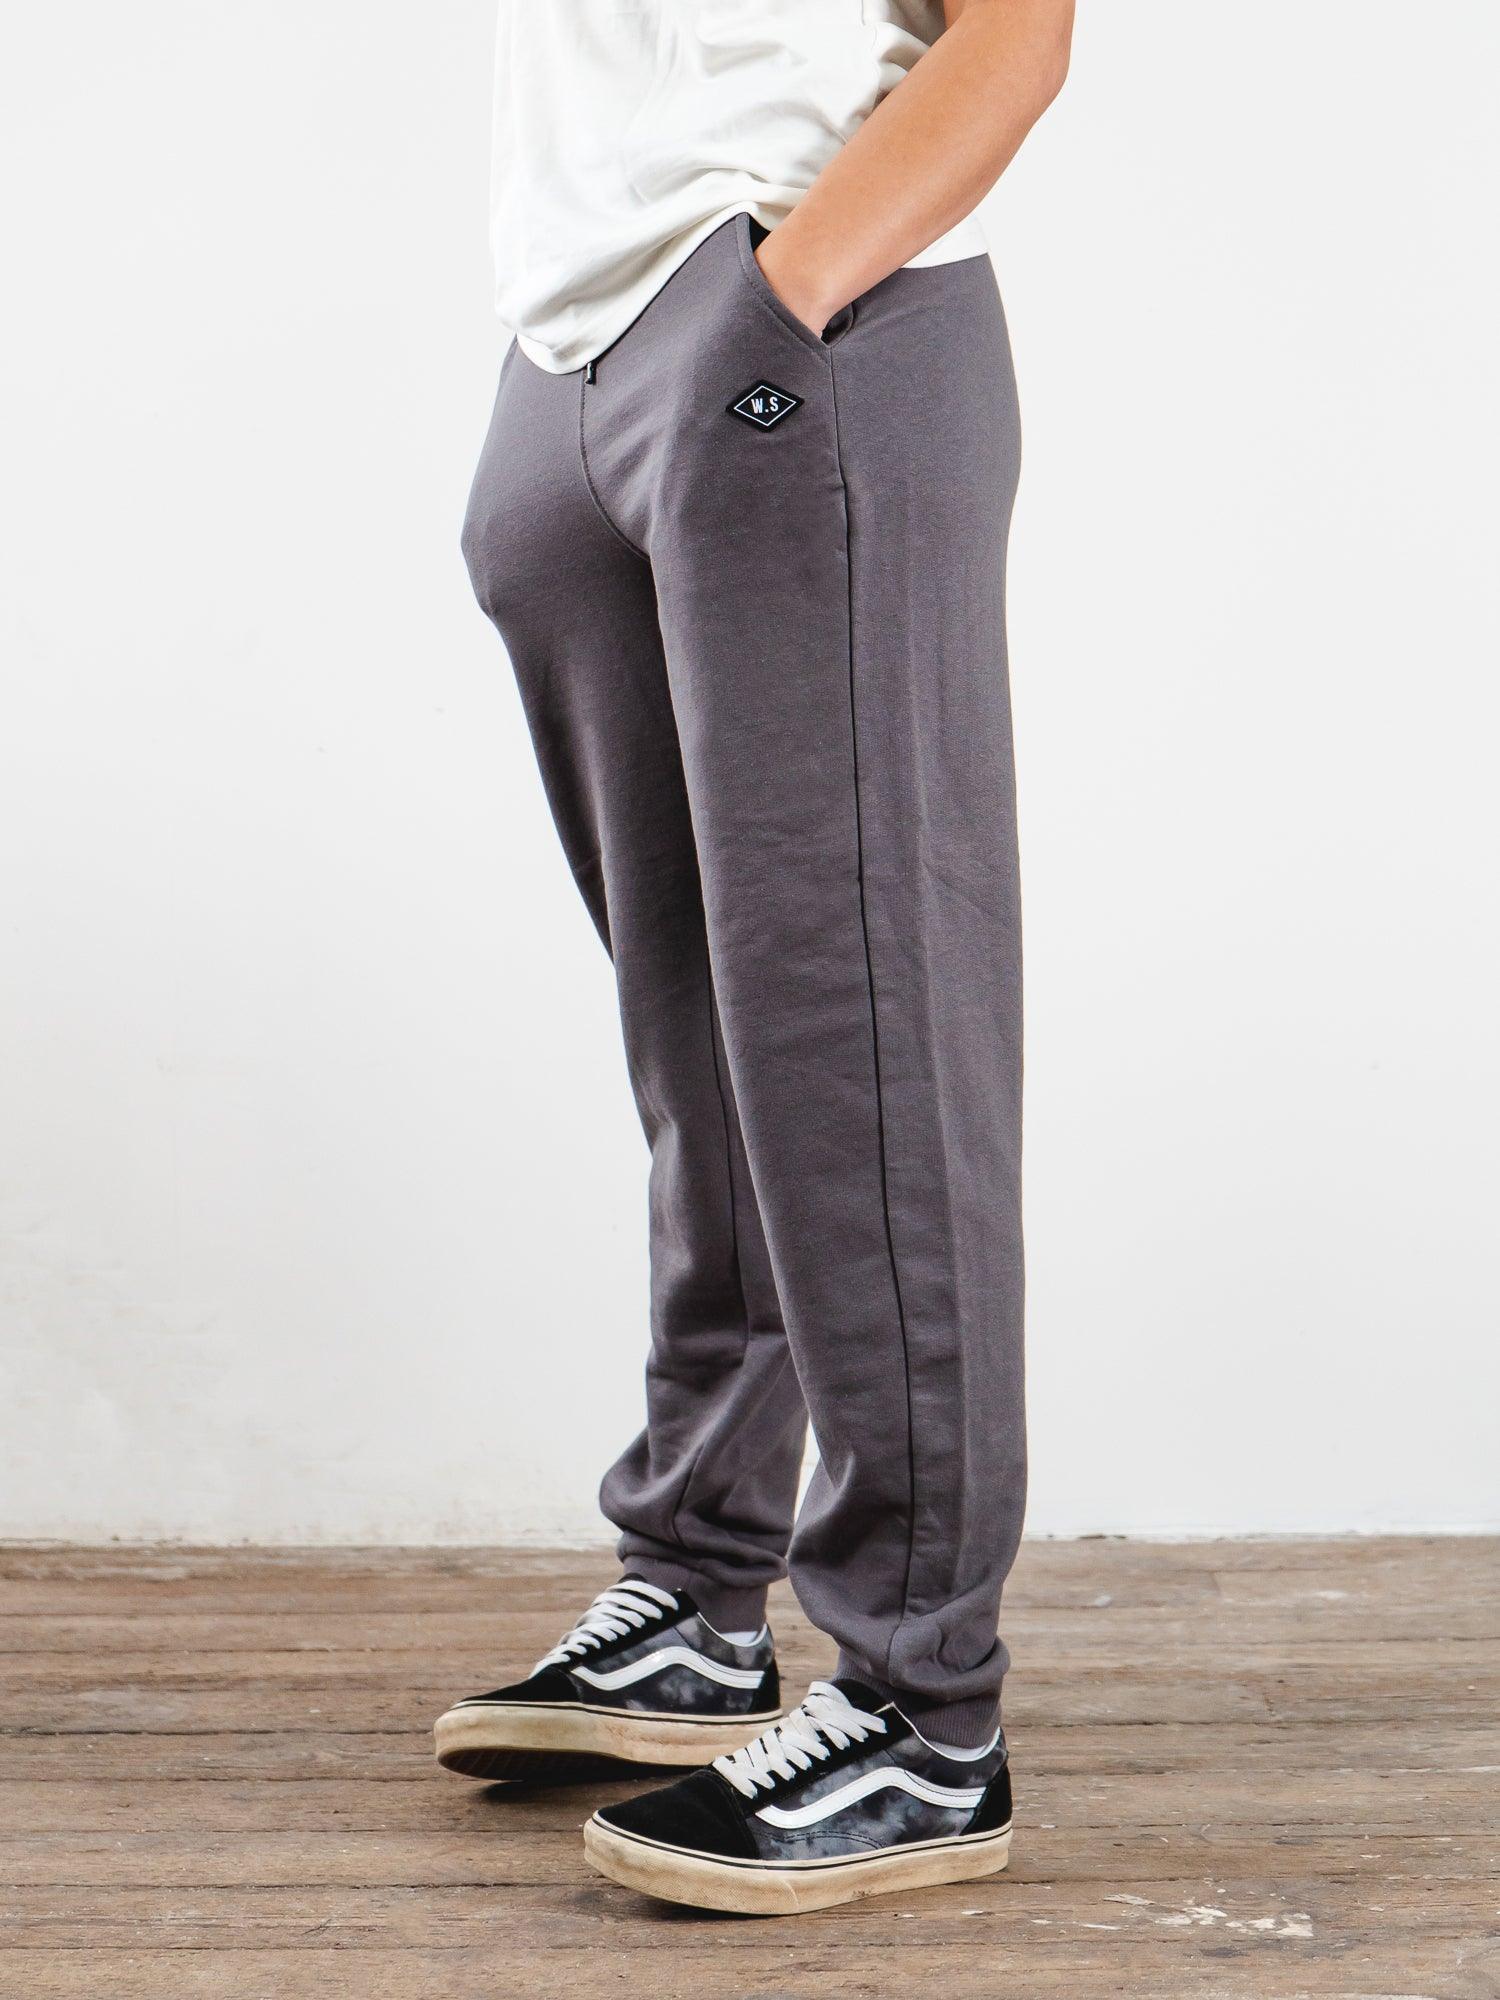 Watershed Grey Joggers